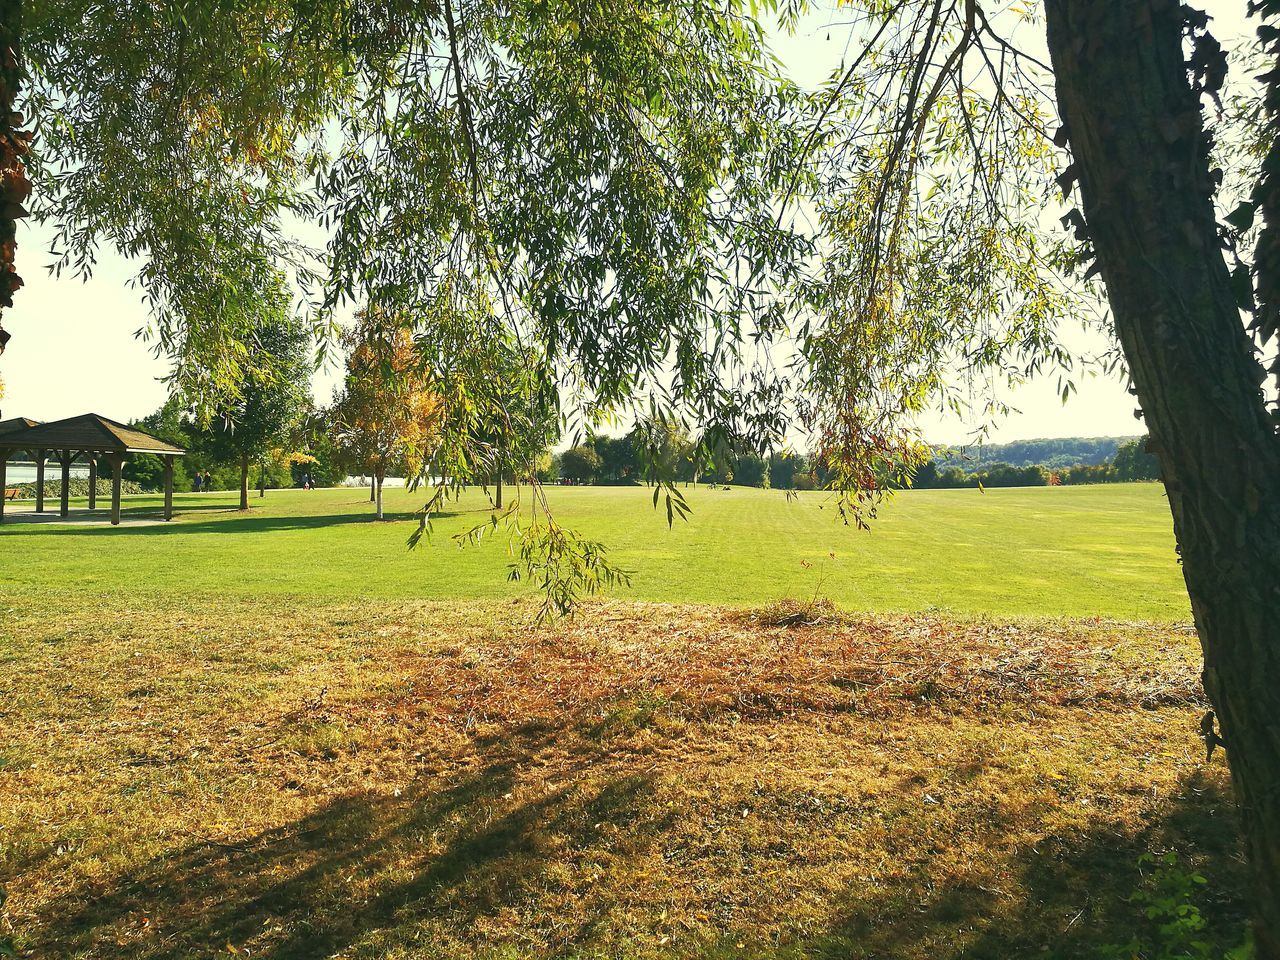 VIEW OF TREES ON GRASSY FIELD